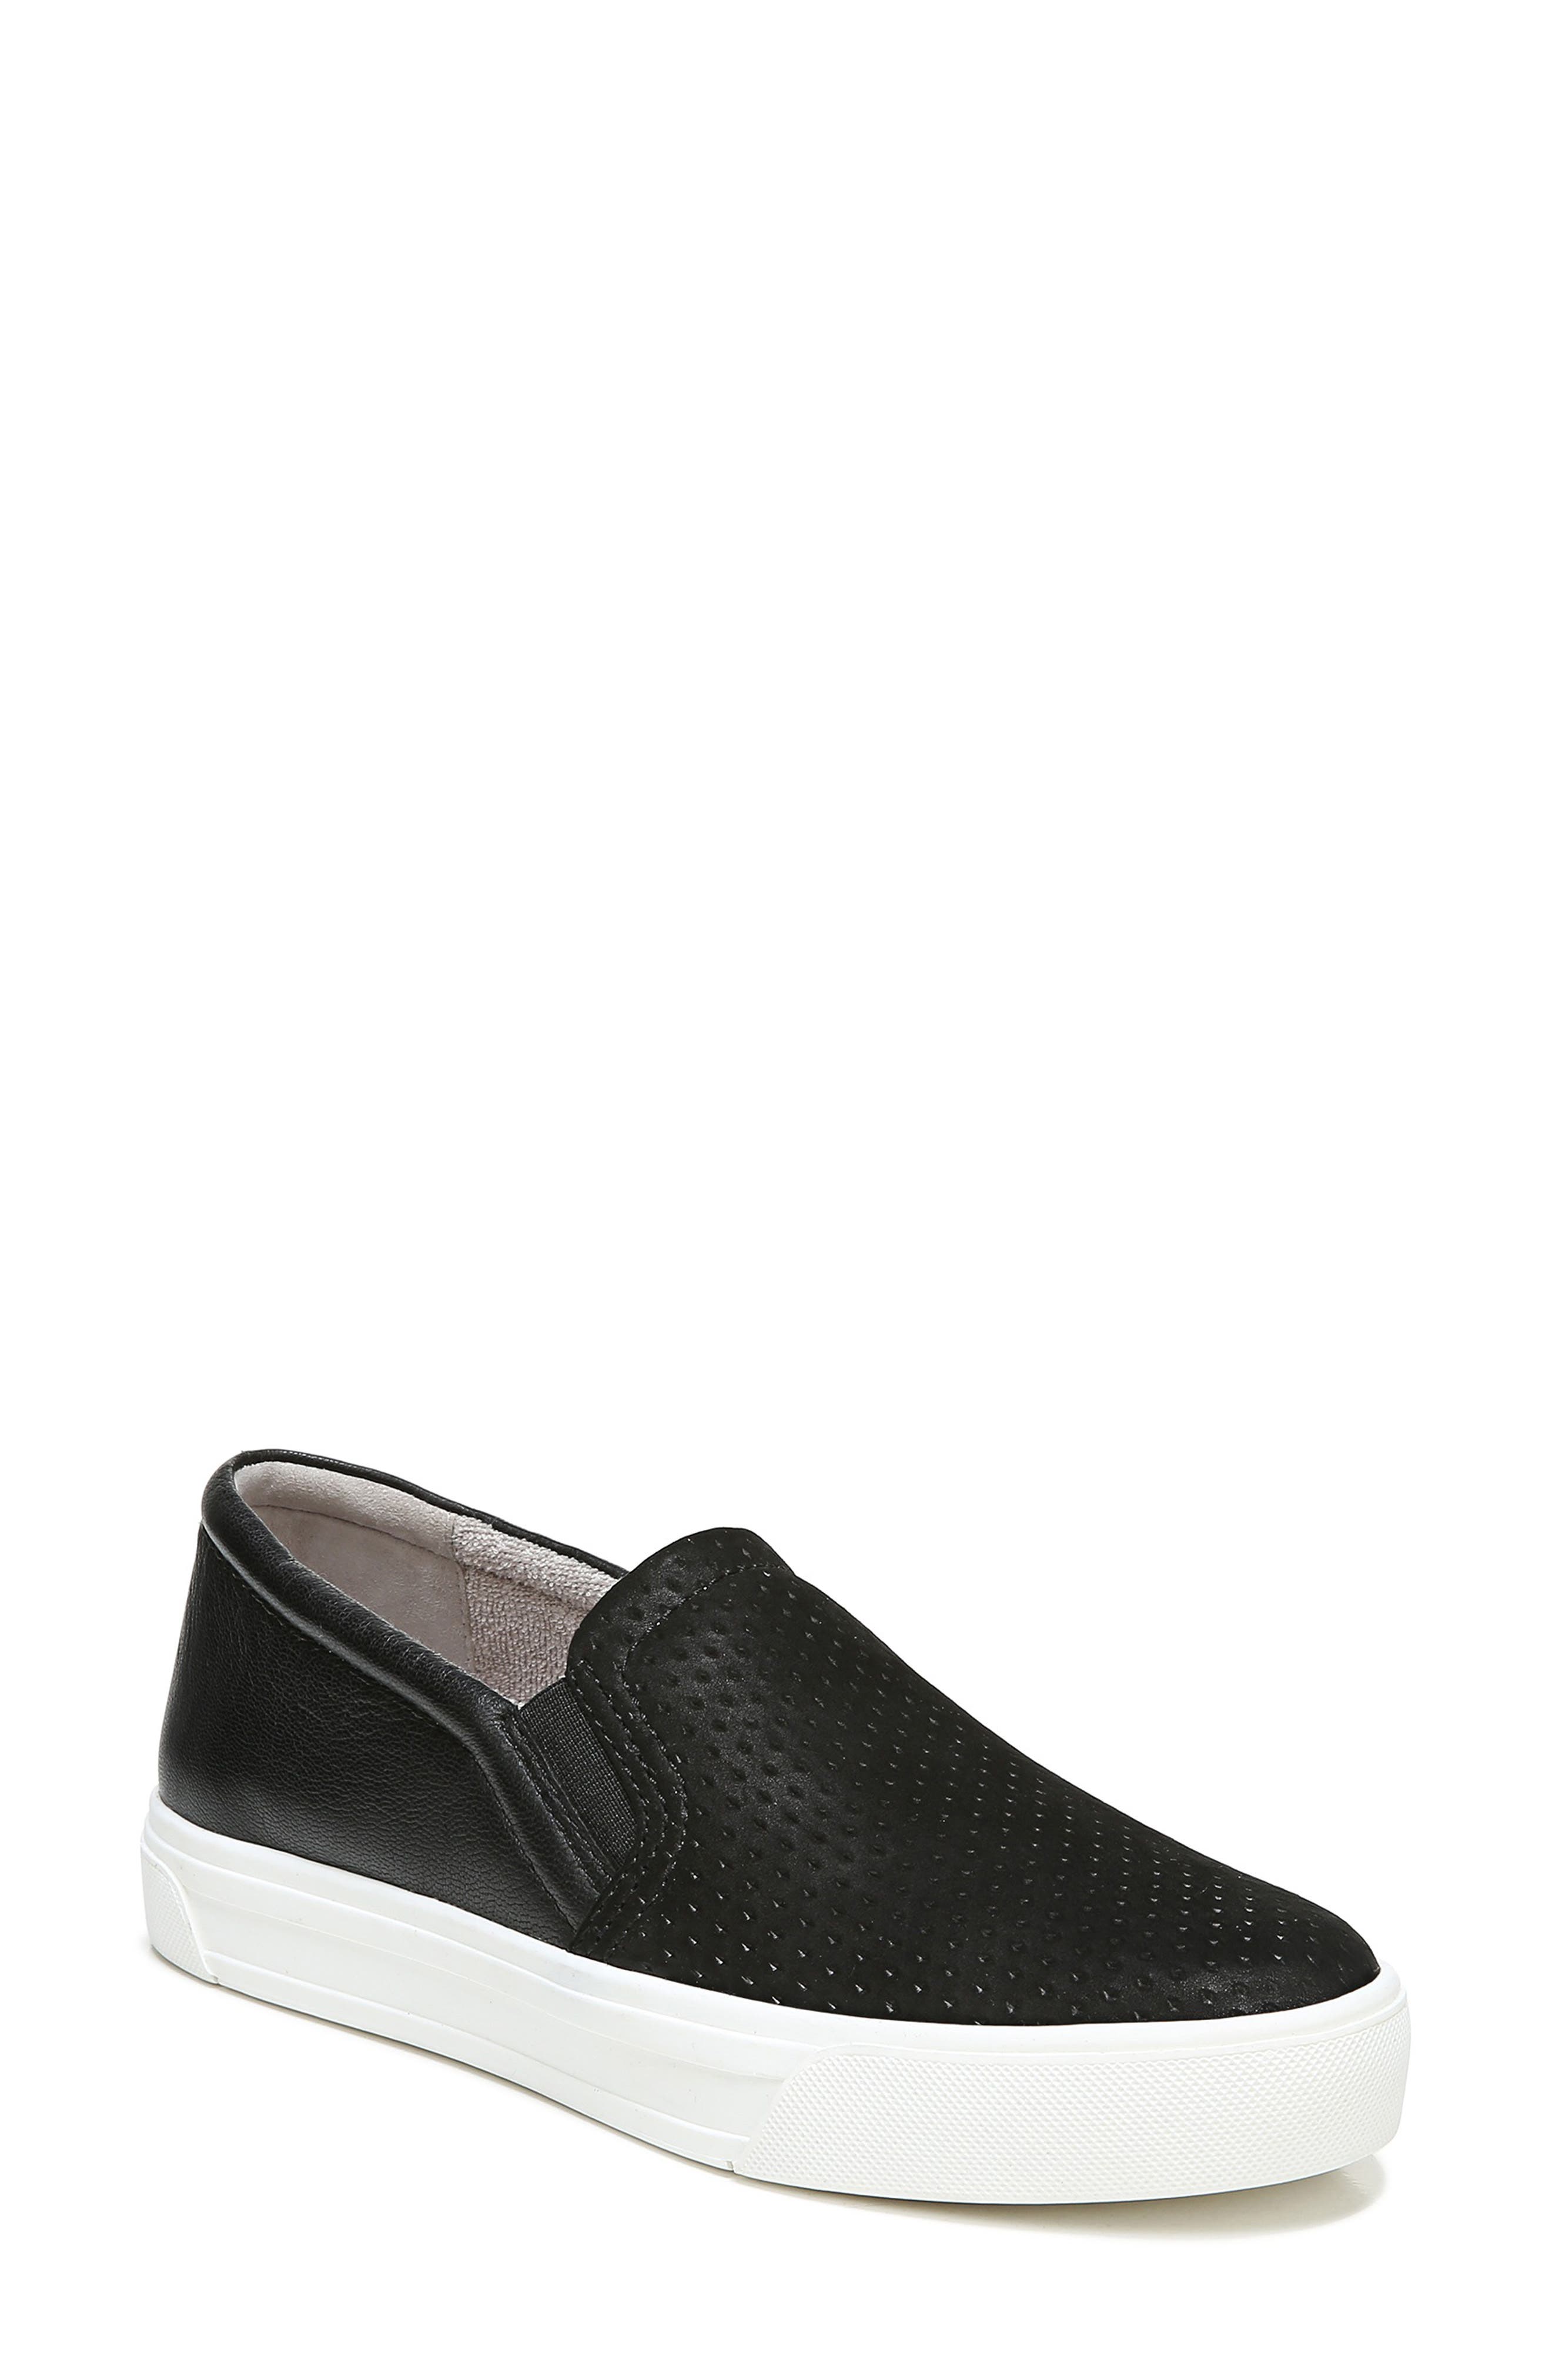 leather slip on sneakers womens